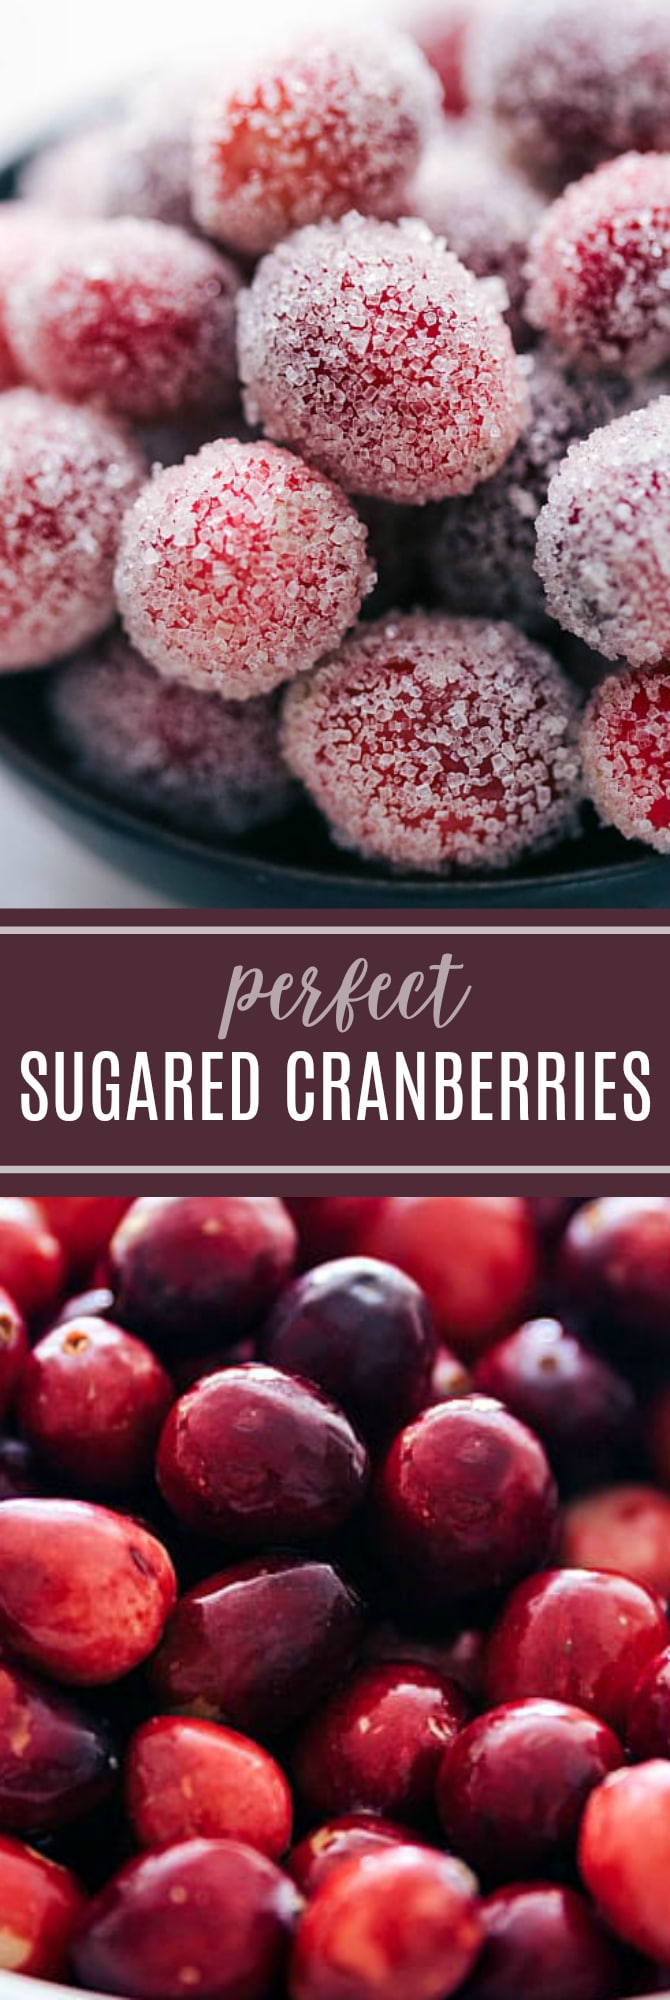 Wow your guests with these sugared cranberries - they make a beautiful and delicious addition to any holiday table. via chelseasmessyapron.com #cranberry #cranberries #sugared #holiday #decor #table #thanksgiving #christmas #dessert #treat #snack #appetizer